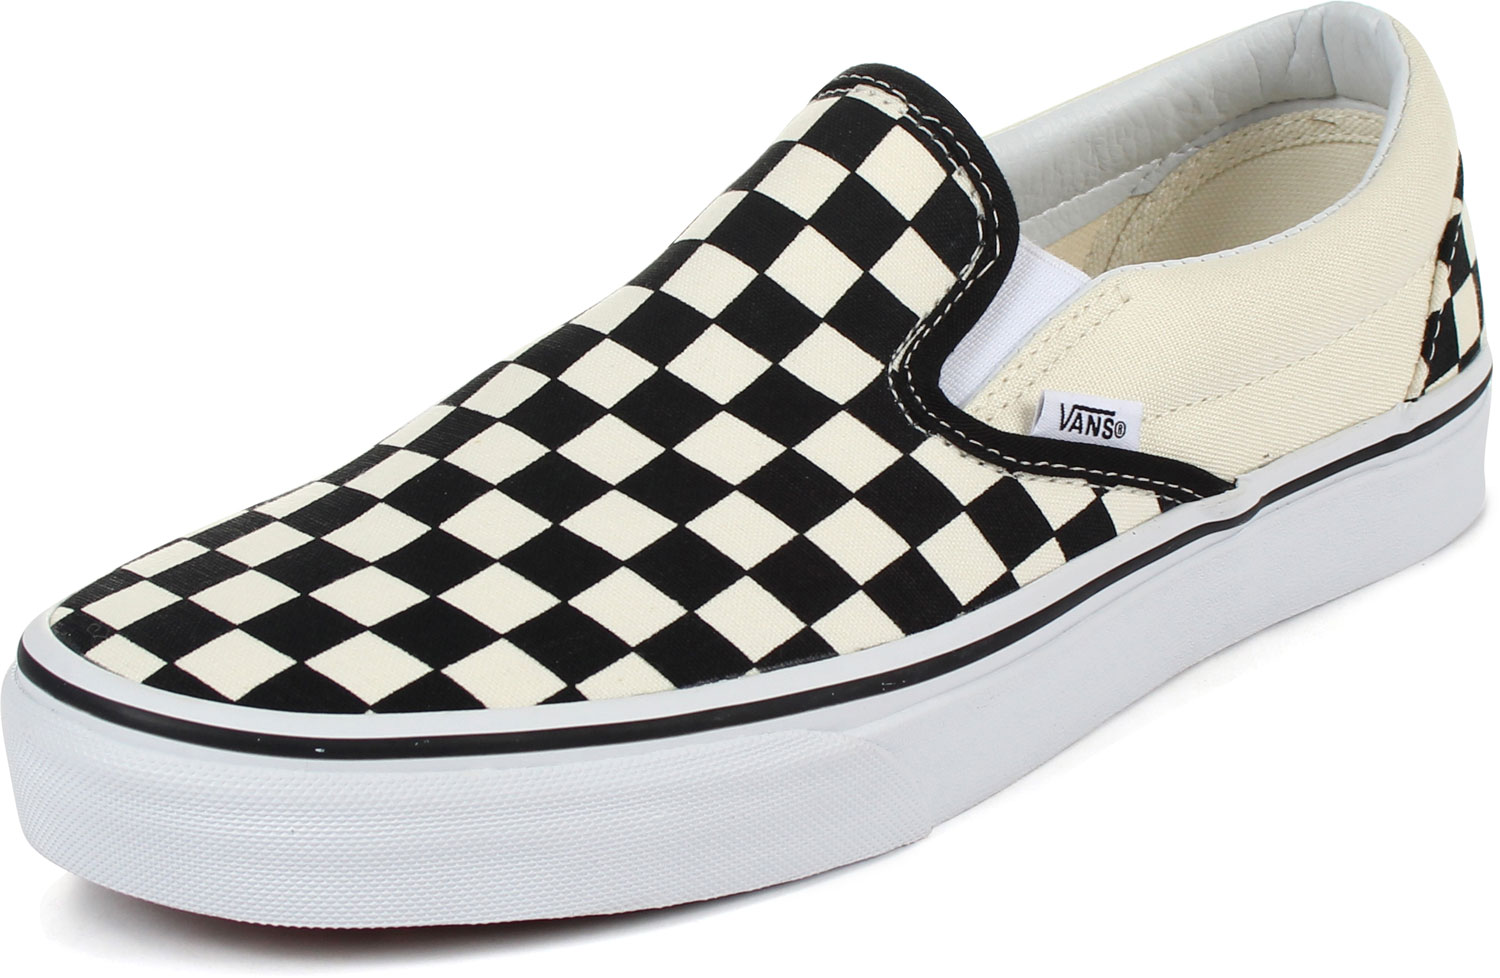 How Much Are Black And White Checkered Vans | stickhealthcare.co.uk